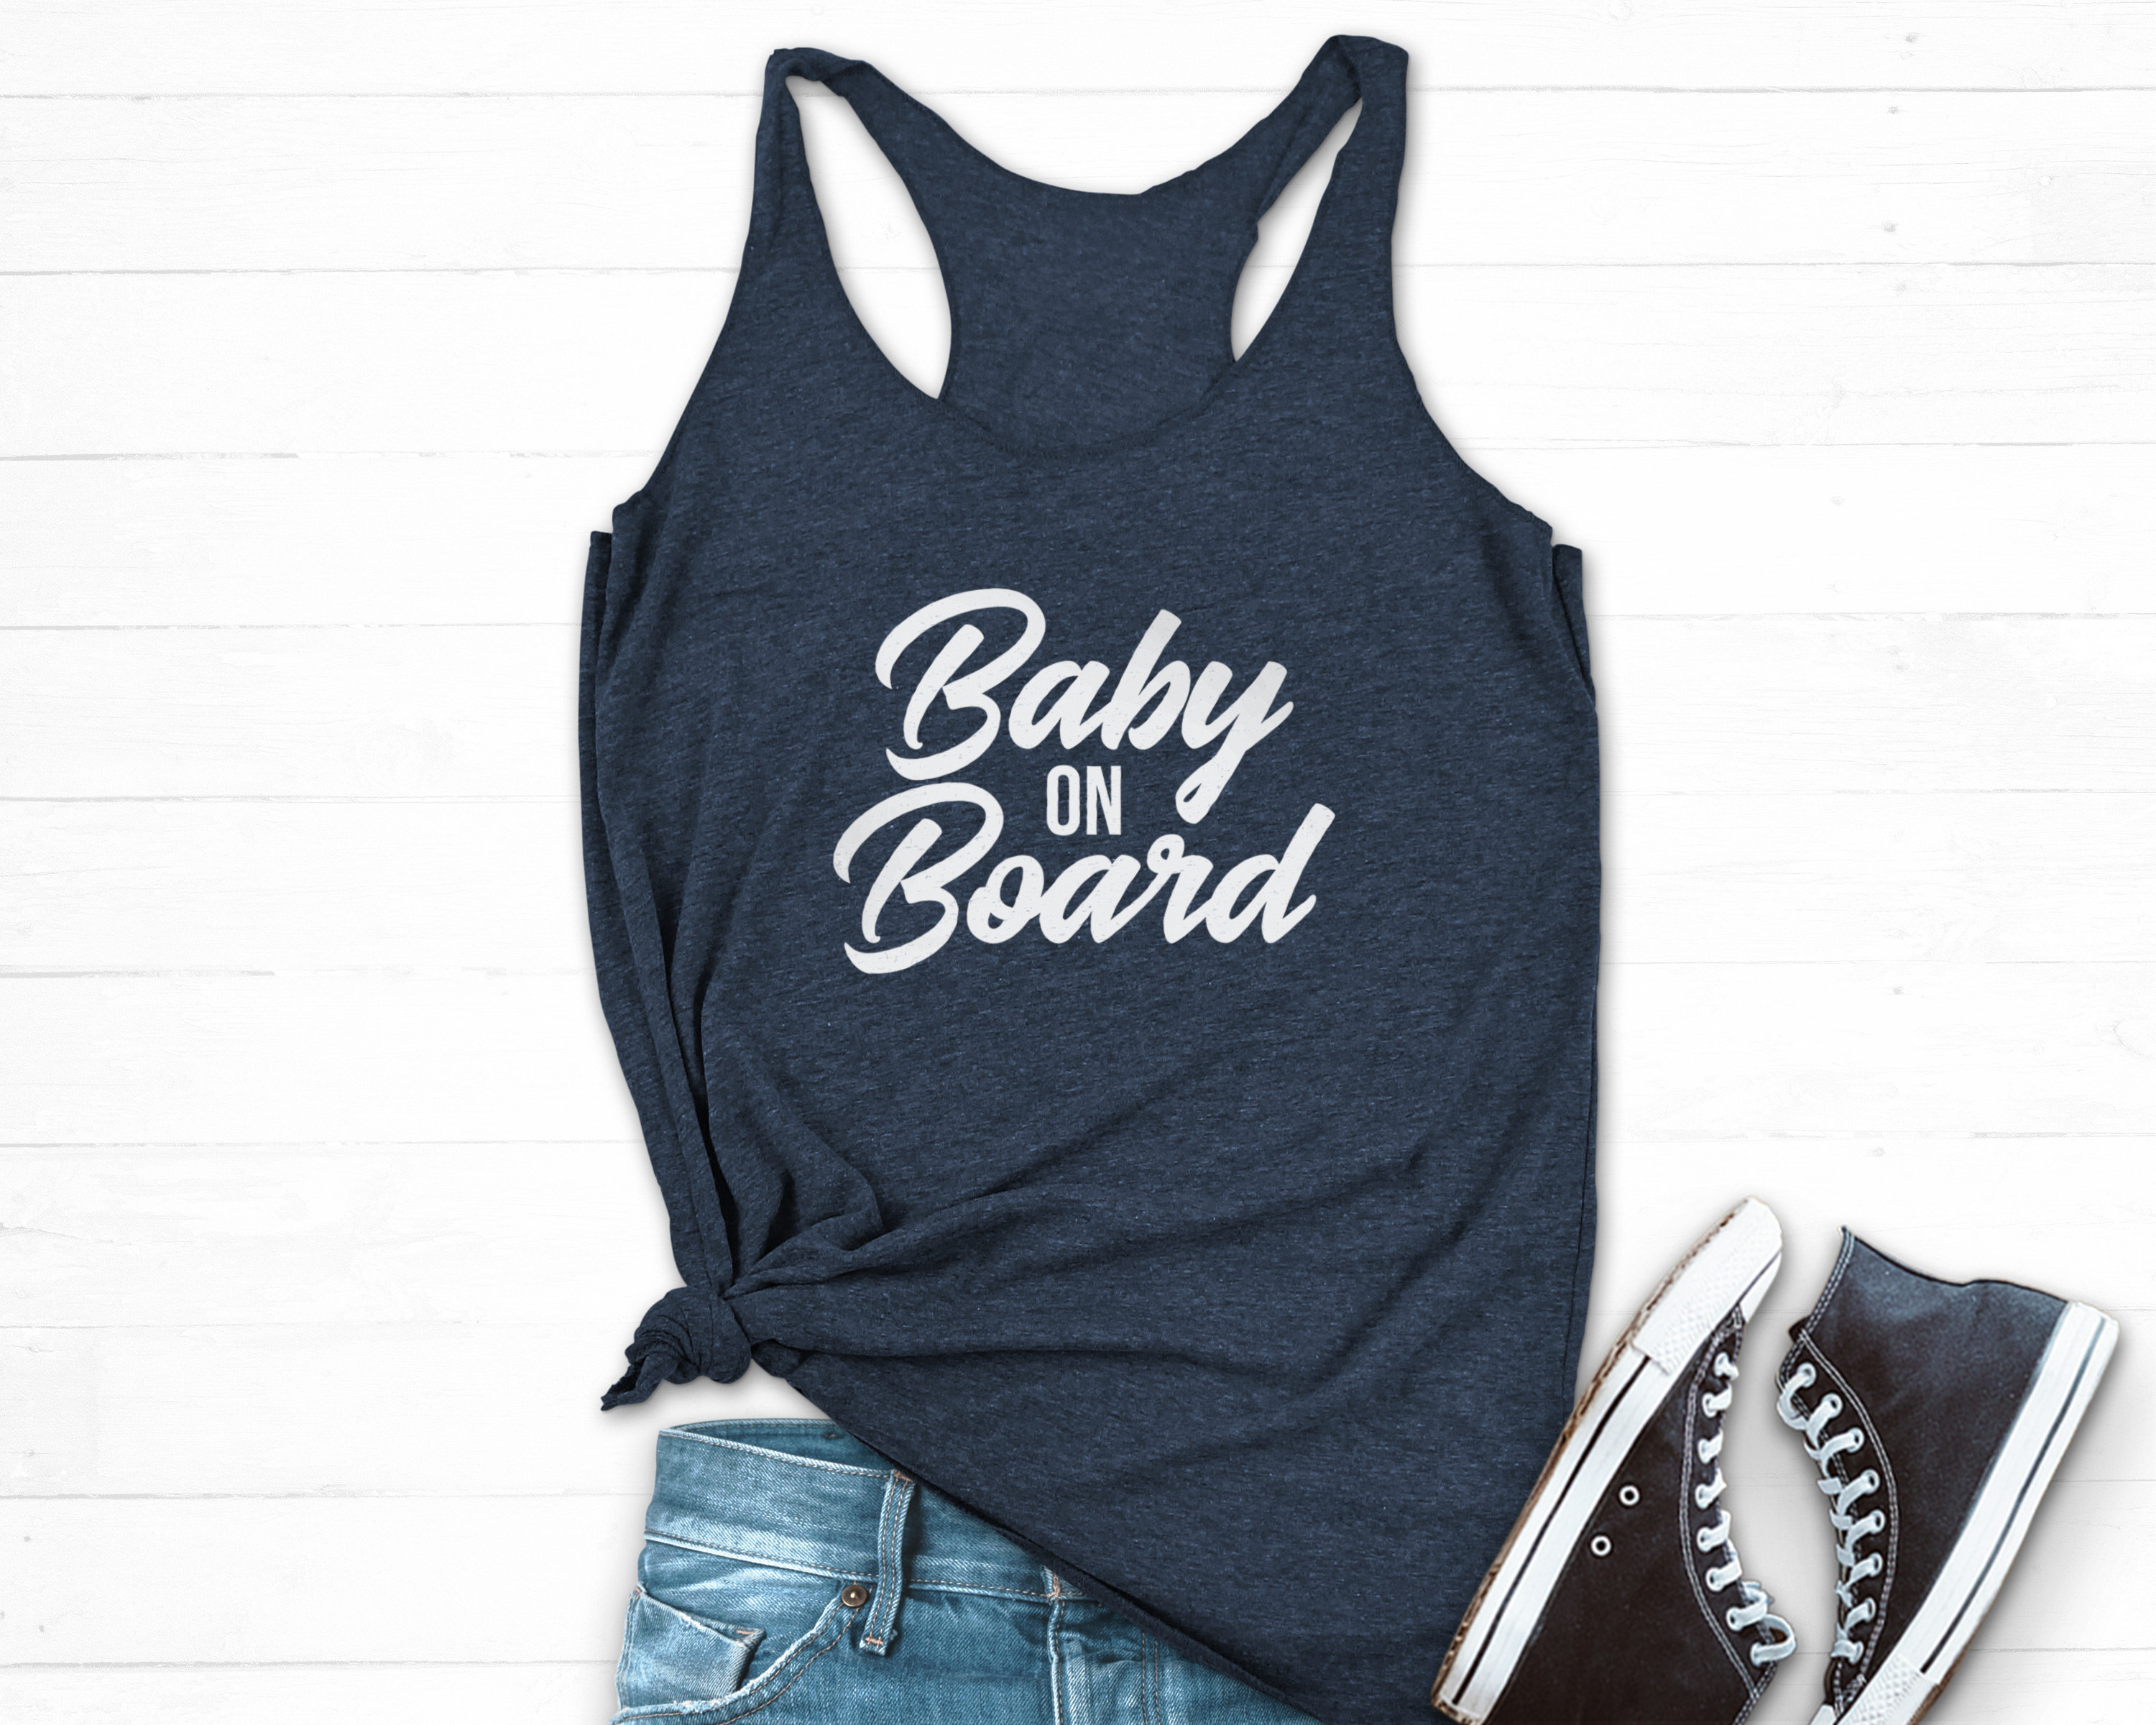 Baby on Board Tank Top, Baby on Board Shirt, Pregnancy Reveal